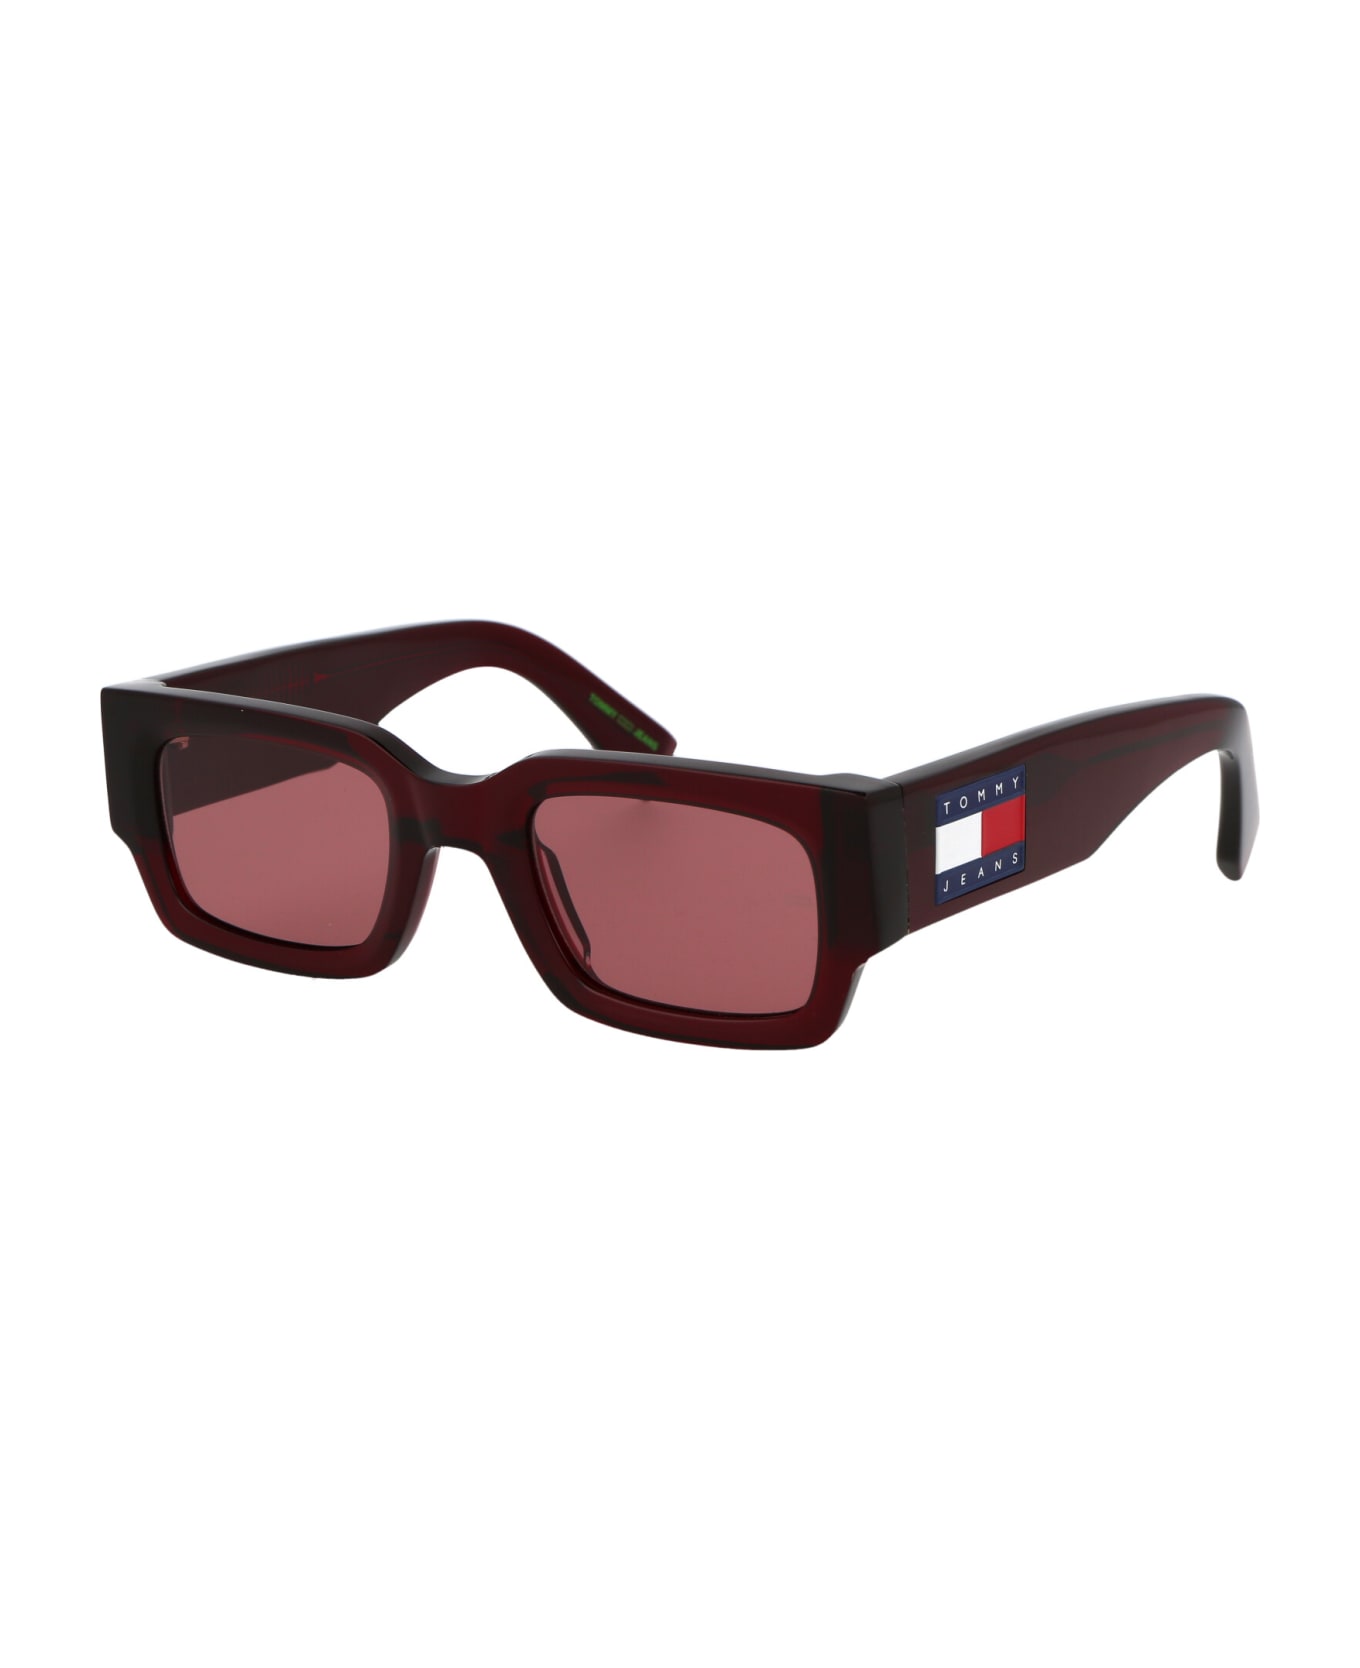 Tommy Hilfiger Tj 0086/s branded Sunglasses - C9A4S RED